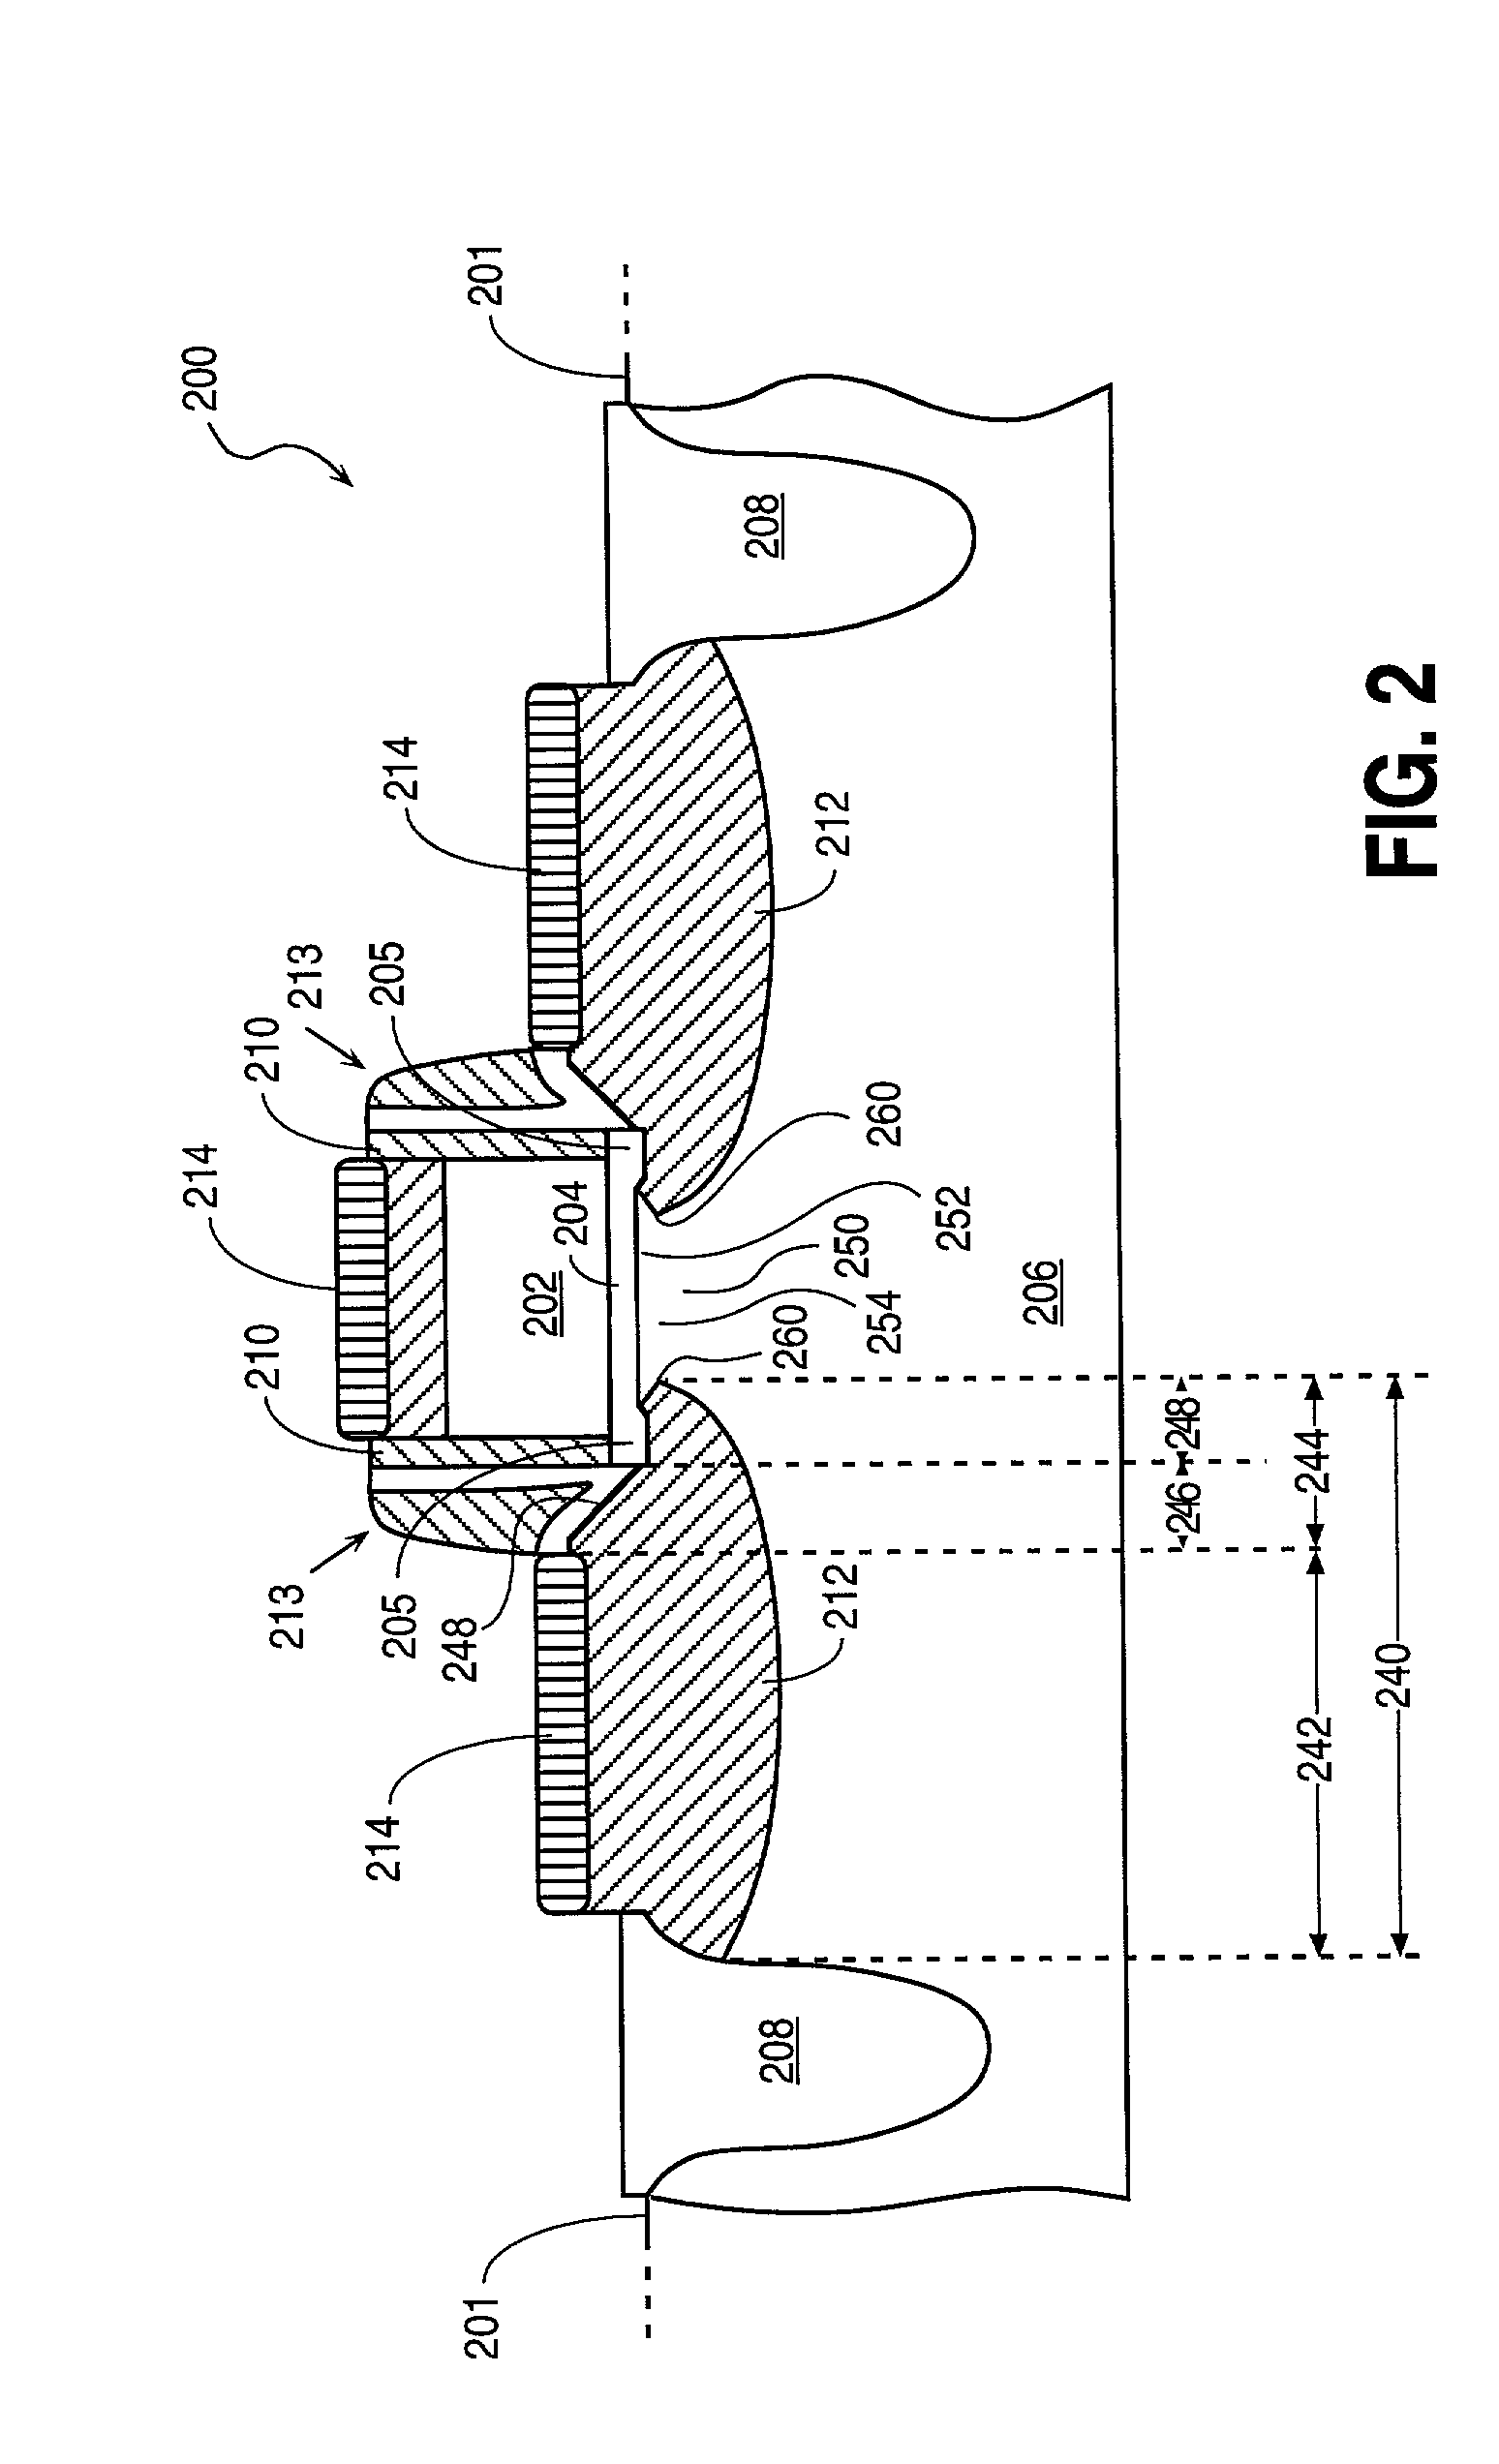 Novel mos transistor structure and method of fabrication